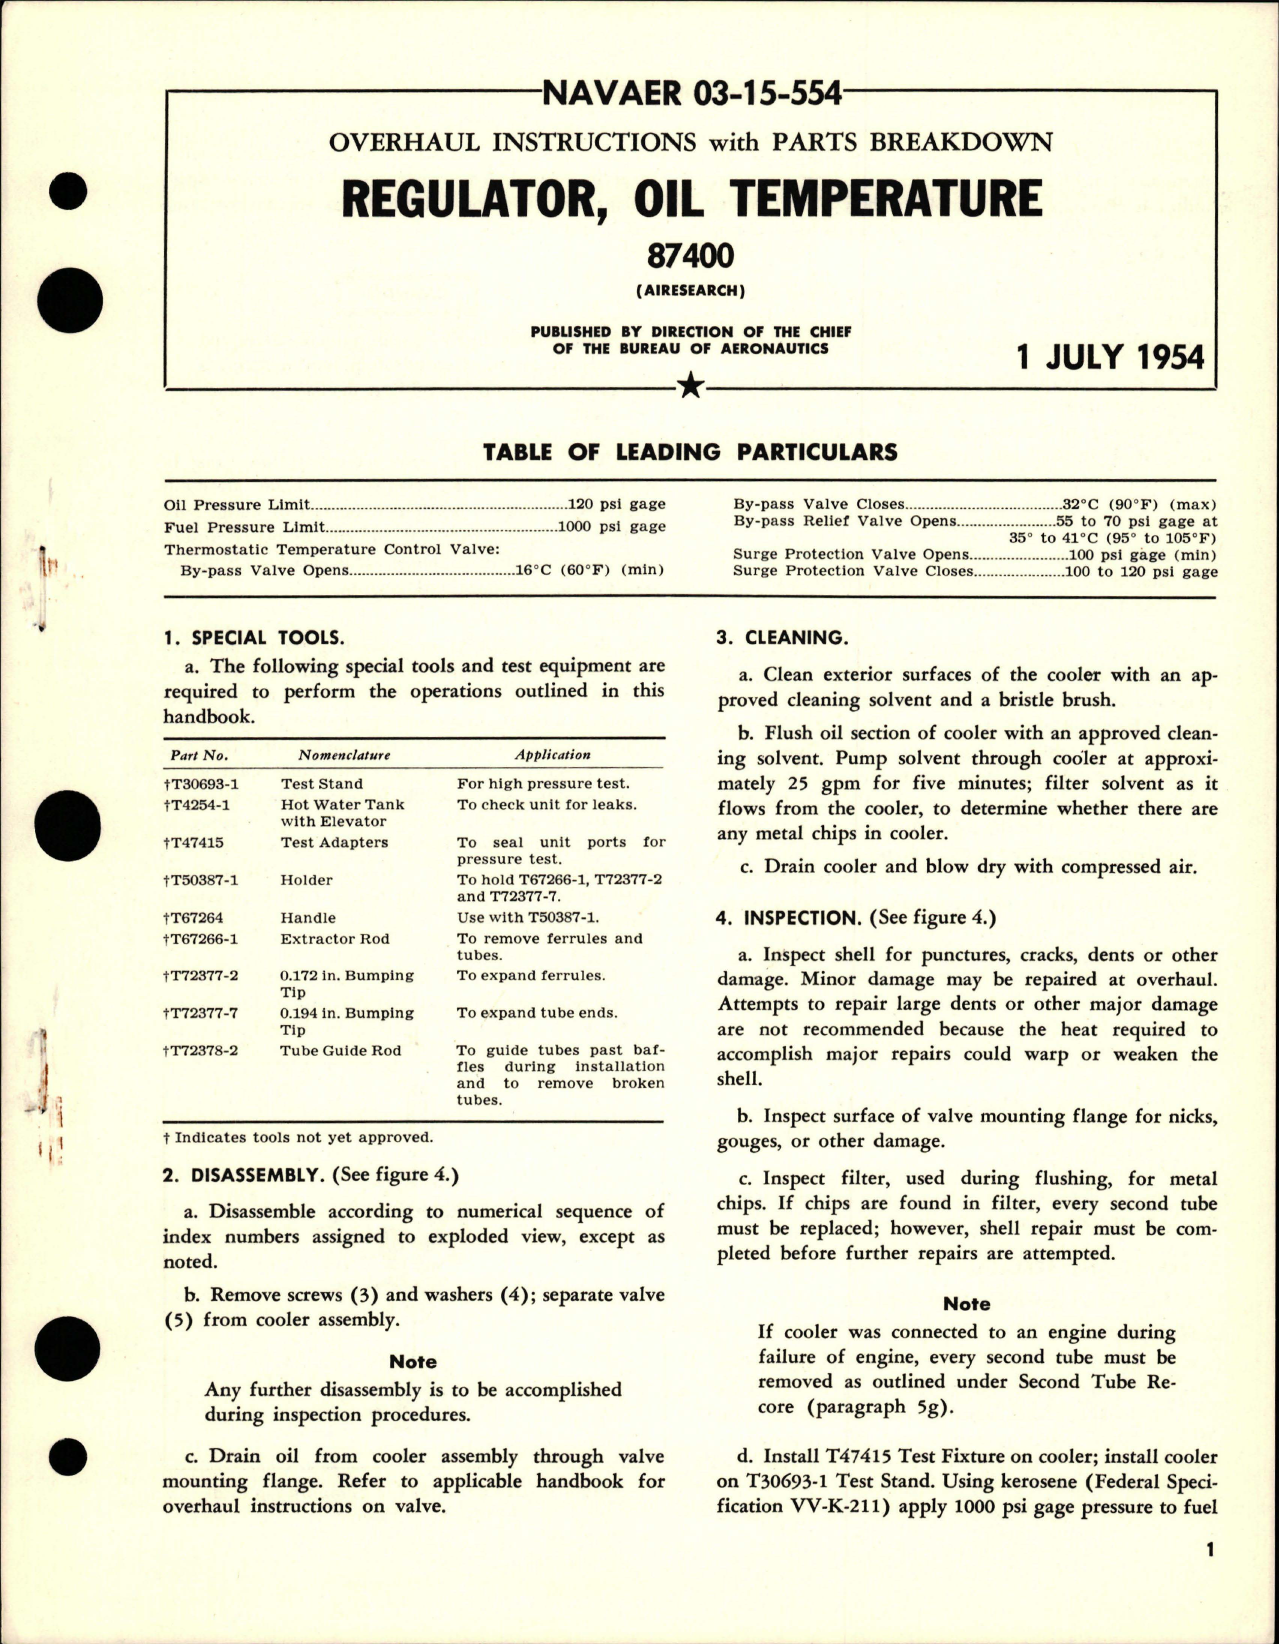 Sample page 1 from AirCorps Library document: Overhaul Instructions with Parts for Oil Temperature Regulator - 87400